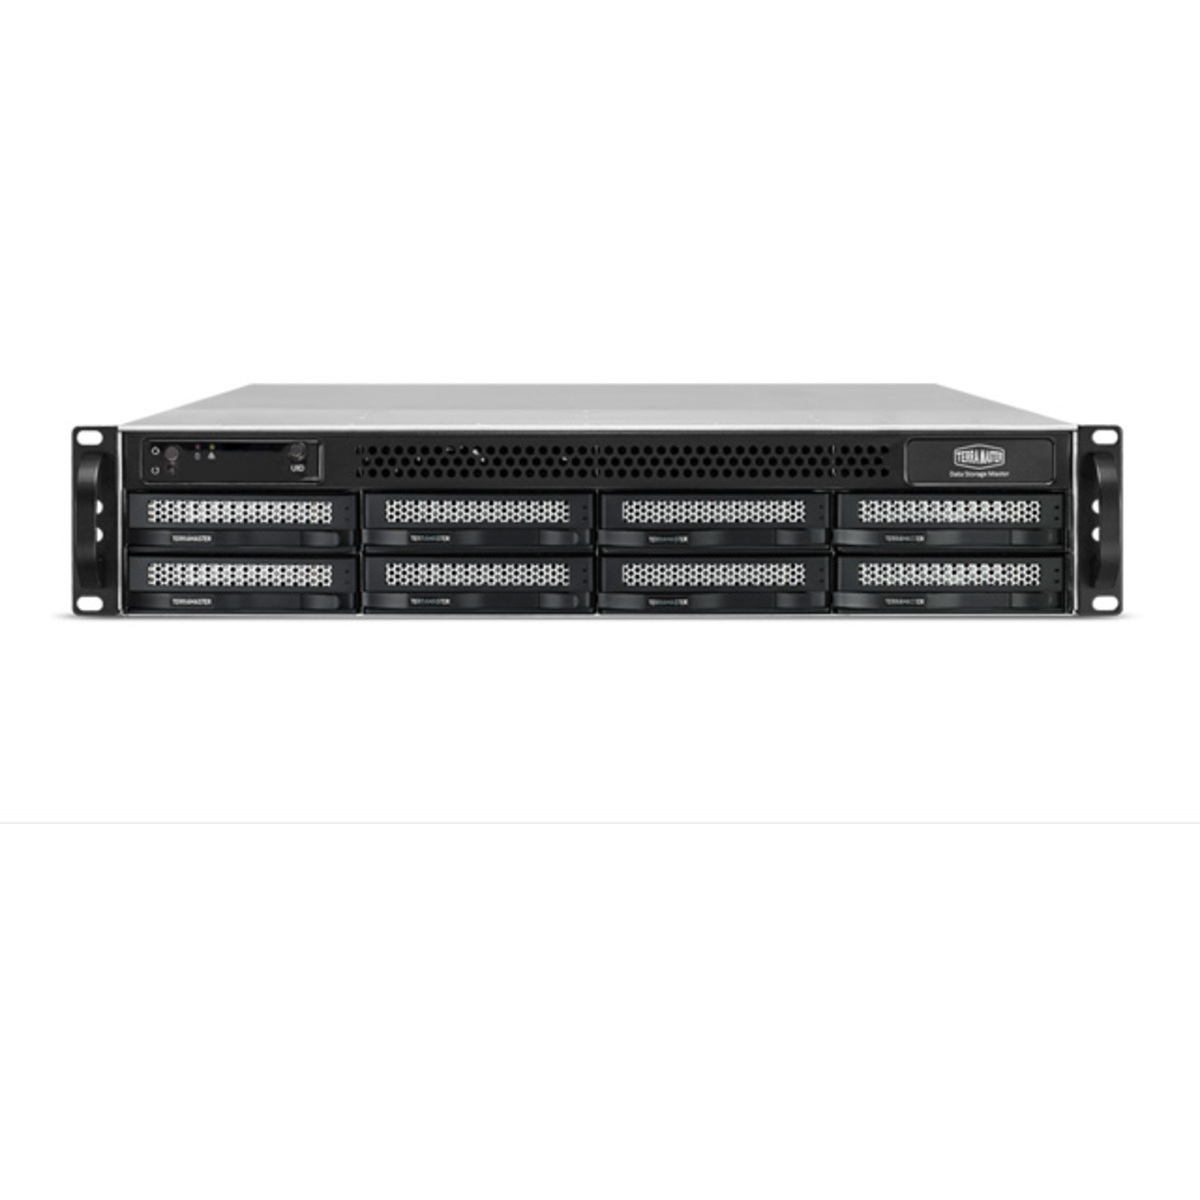 TerraMaster U8-423 10tb 8-Bay RackMount Multimedia / Power User / Business NAS - Network Attached Storage Device 5x2tb Western Digital Red Plus WD20EFZX 3.5 5400rpm SATA 6Gb/s HDD NAS Class Drives Installed - Burn-In Tested - FREE RAM UPGRADE U8-423